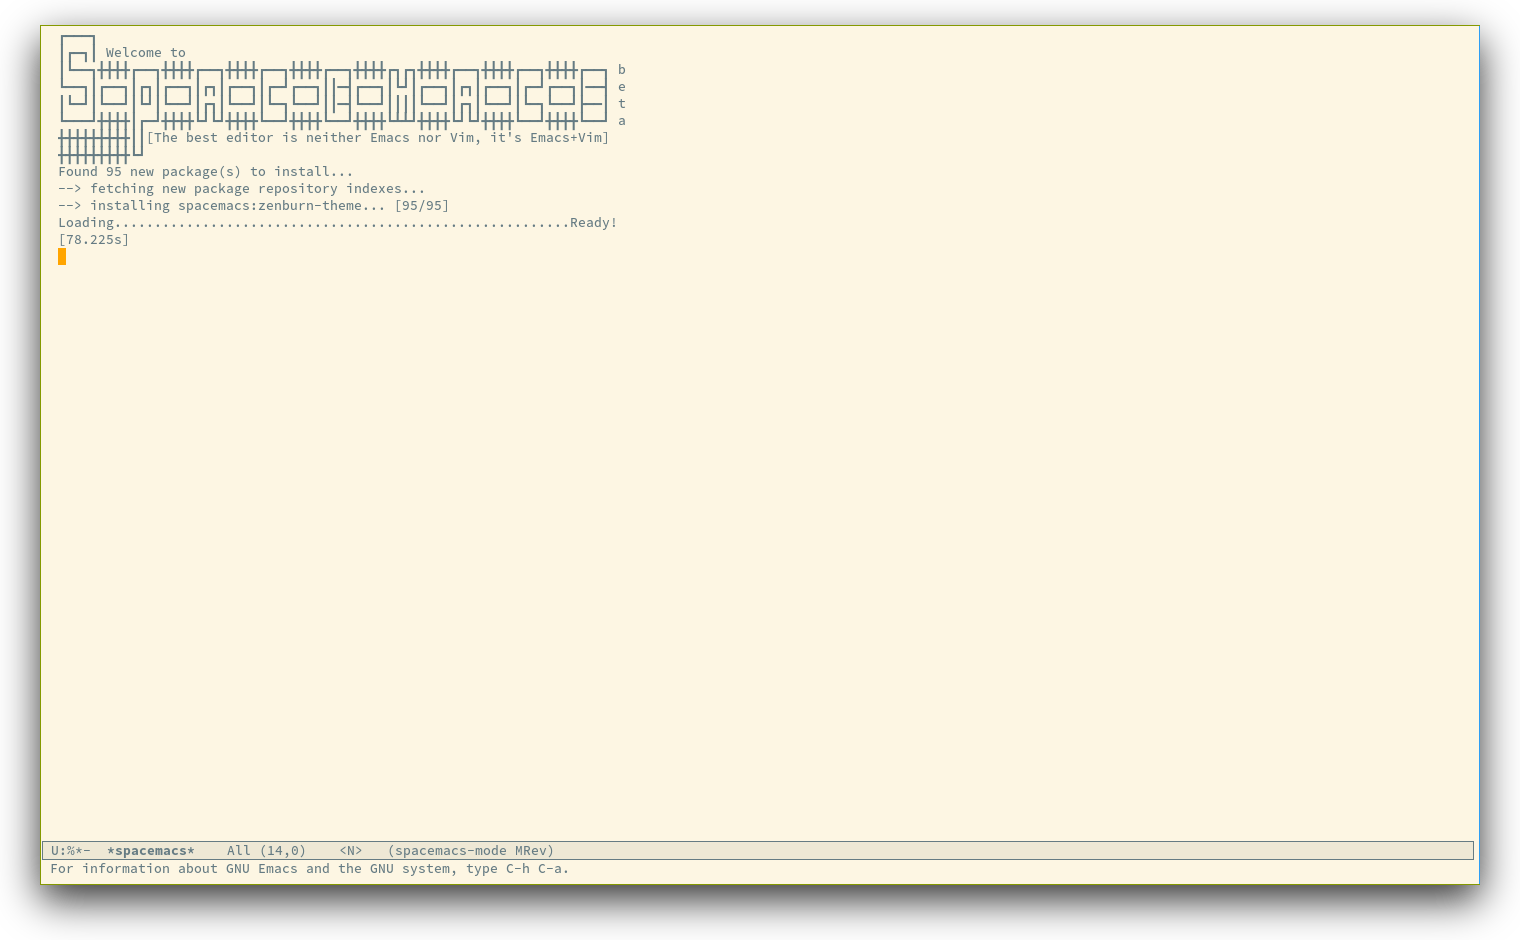 /TakeV/spacemacs/media/commit/af03fb55ffdc511e582283e65c5ba359d6231514/doc/img/spacemacs-startup.png